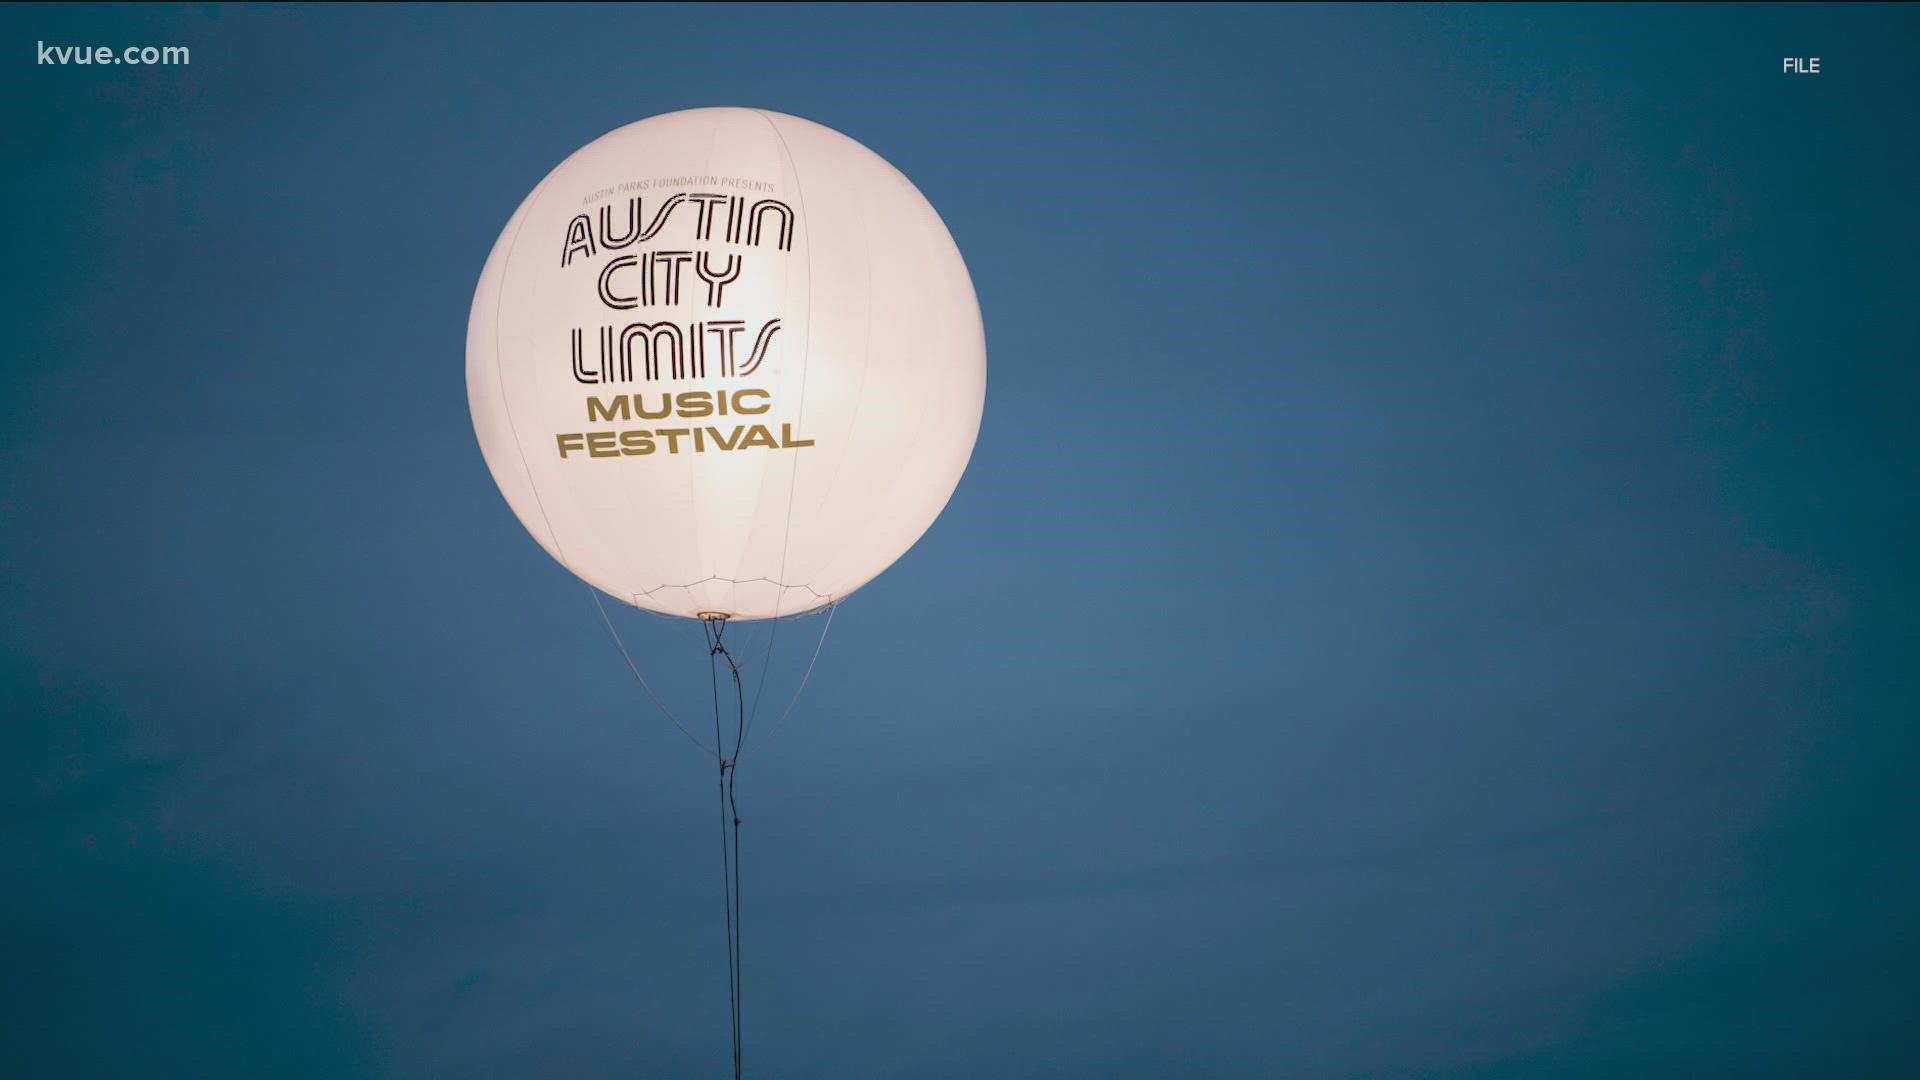 Organizers announced next year's dates for the Austin City Limits Music Festival.